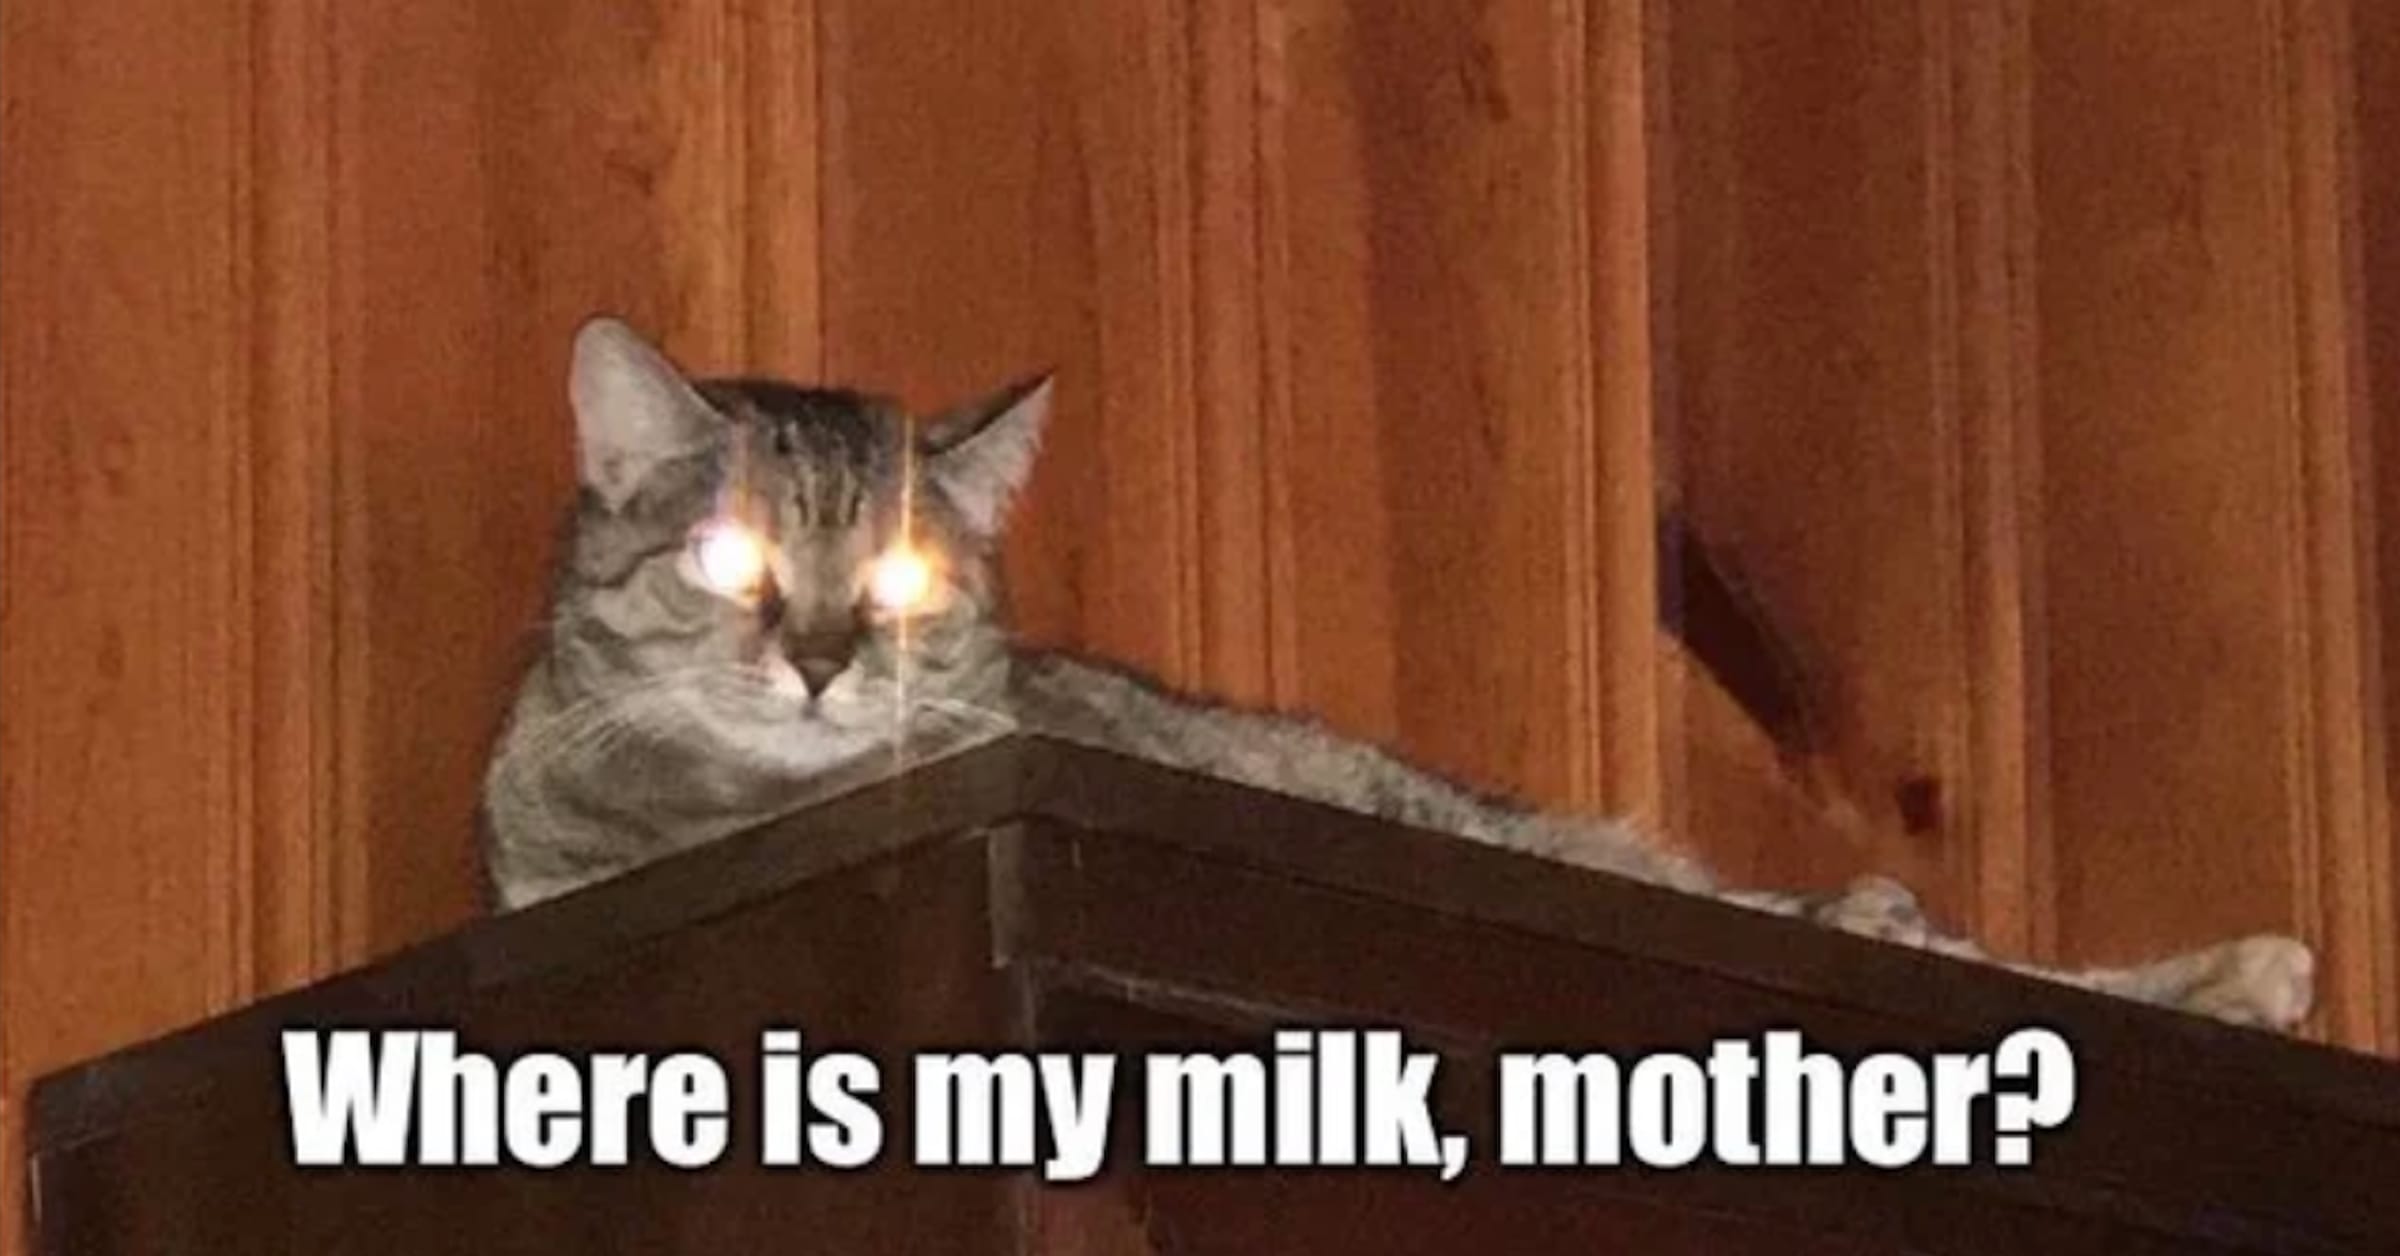 10 of the Most Famous Cat Memes as of 2020